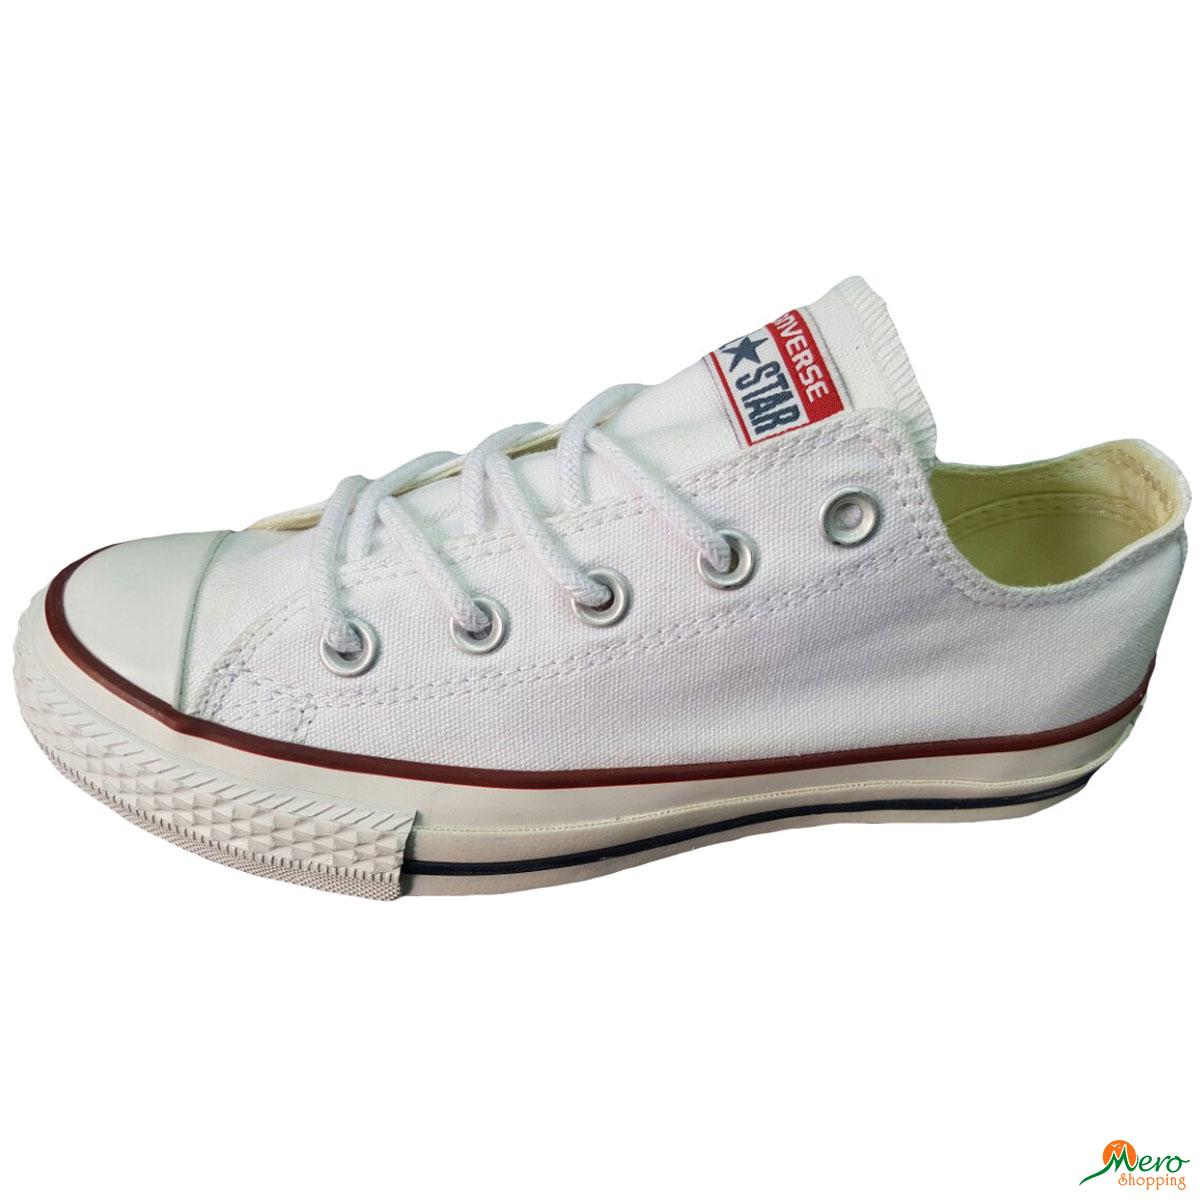 Buy online Classic Converse Design in Nepal